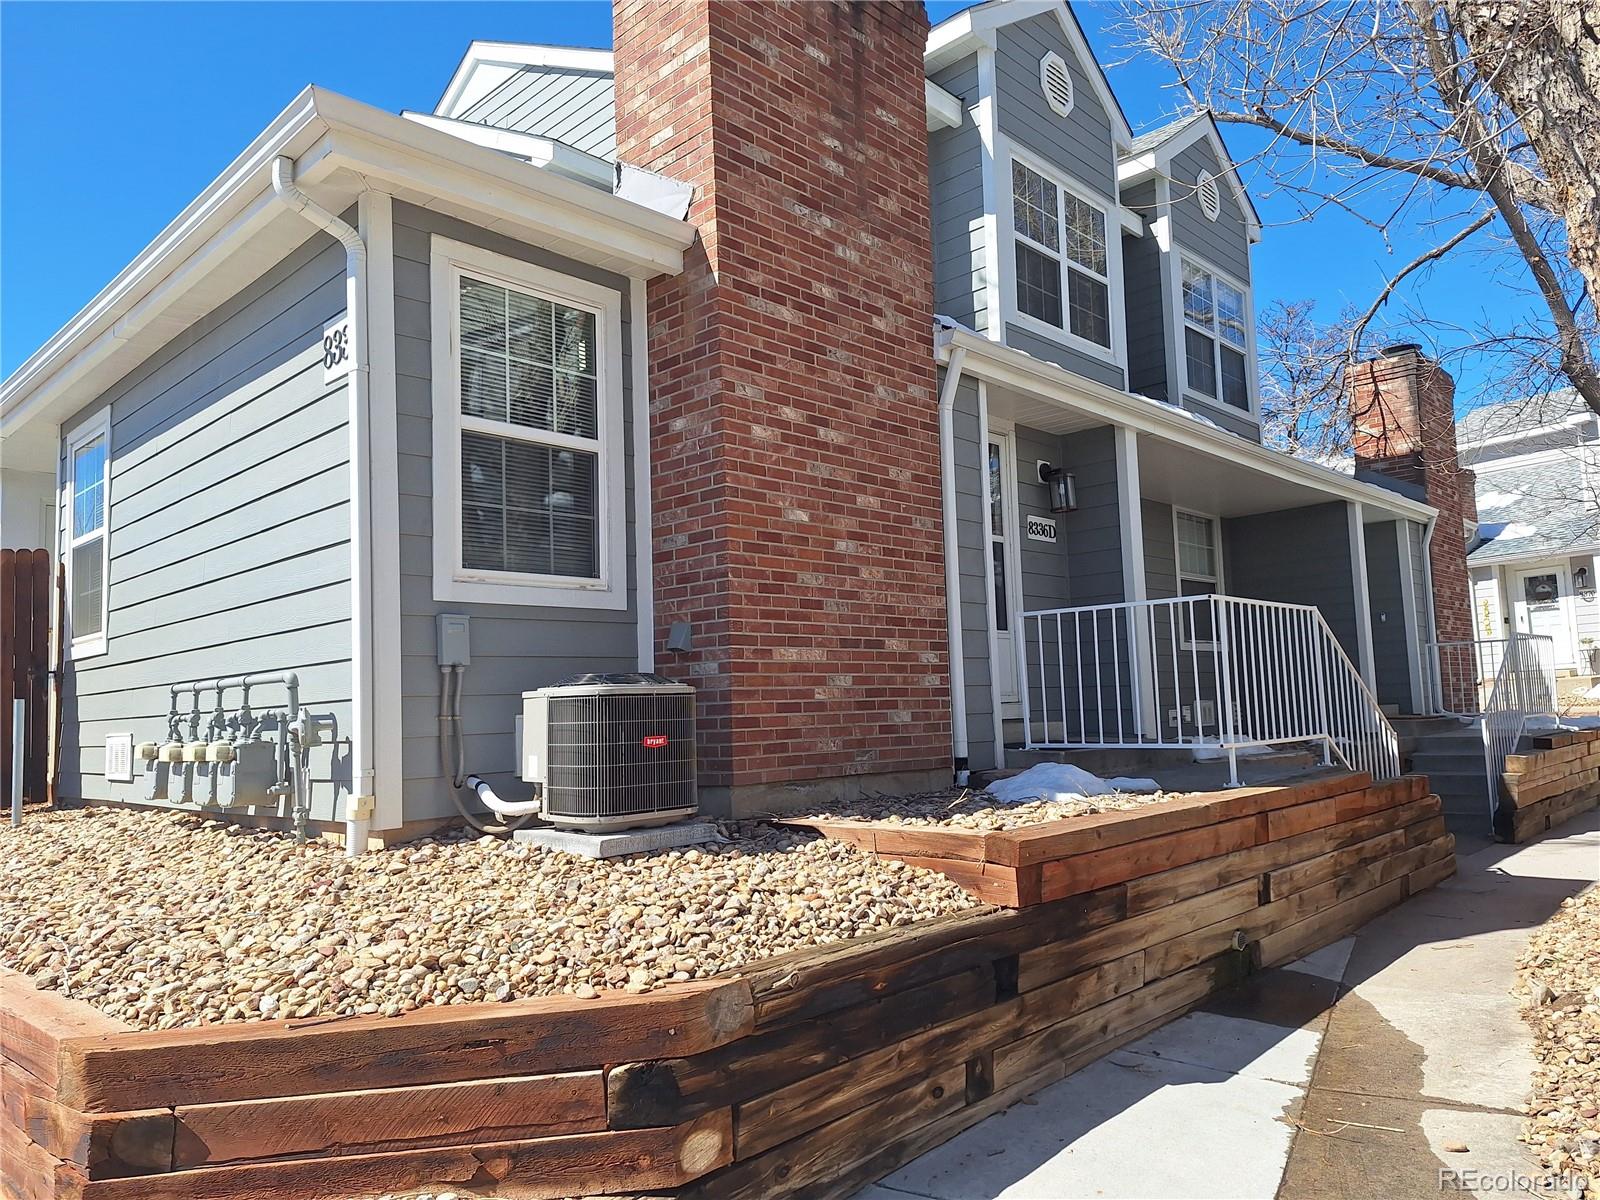 8336 W 87th Drive D, Arvada  MLS: 2650336 Beds: 2 Baths: 2 Price: $384,500